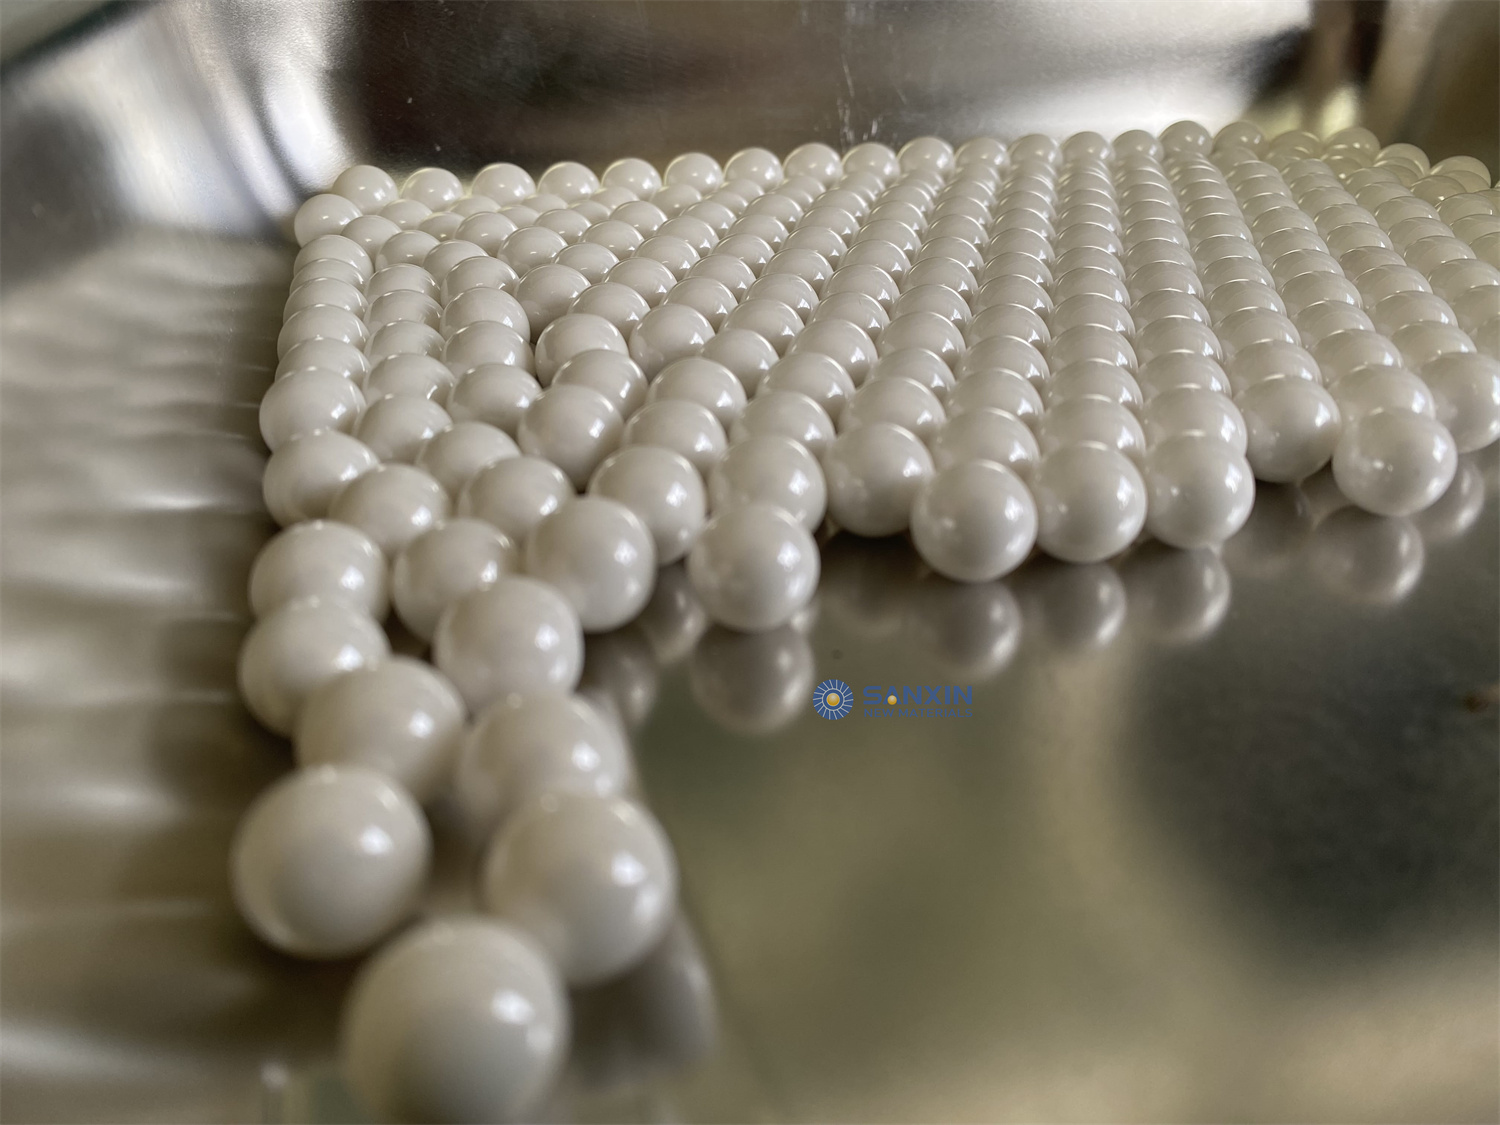 Selecting zirconia beads is contingent upon equipment materials and material choice.